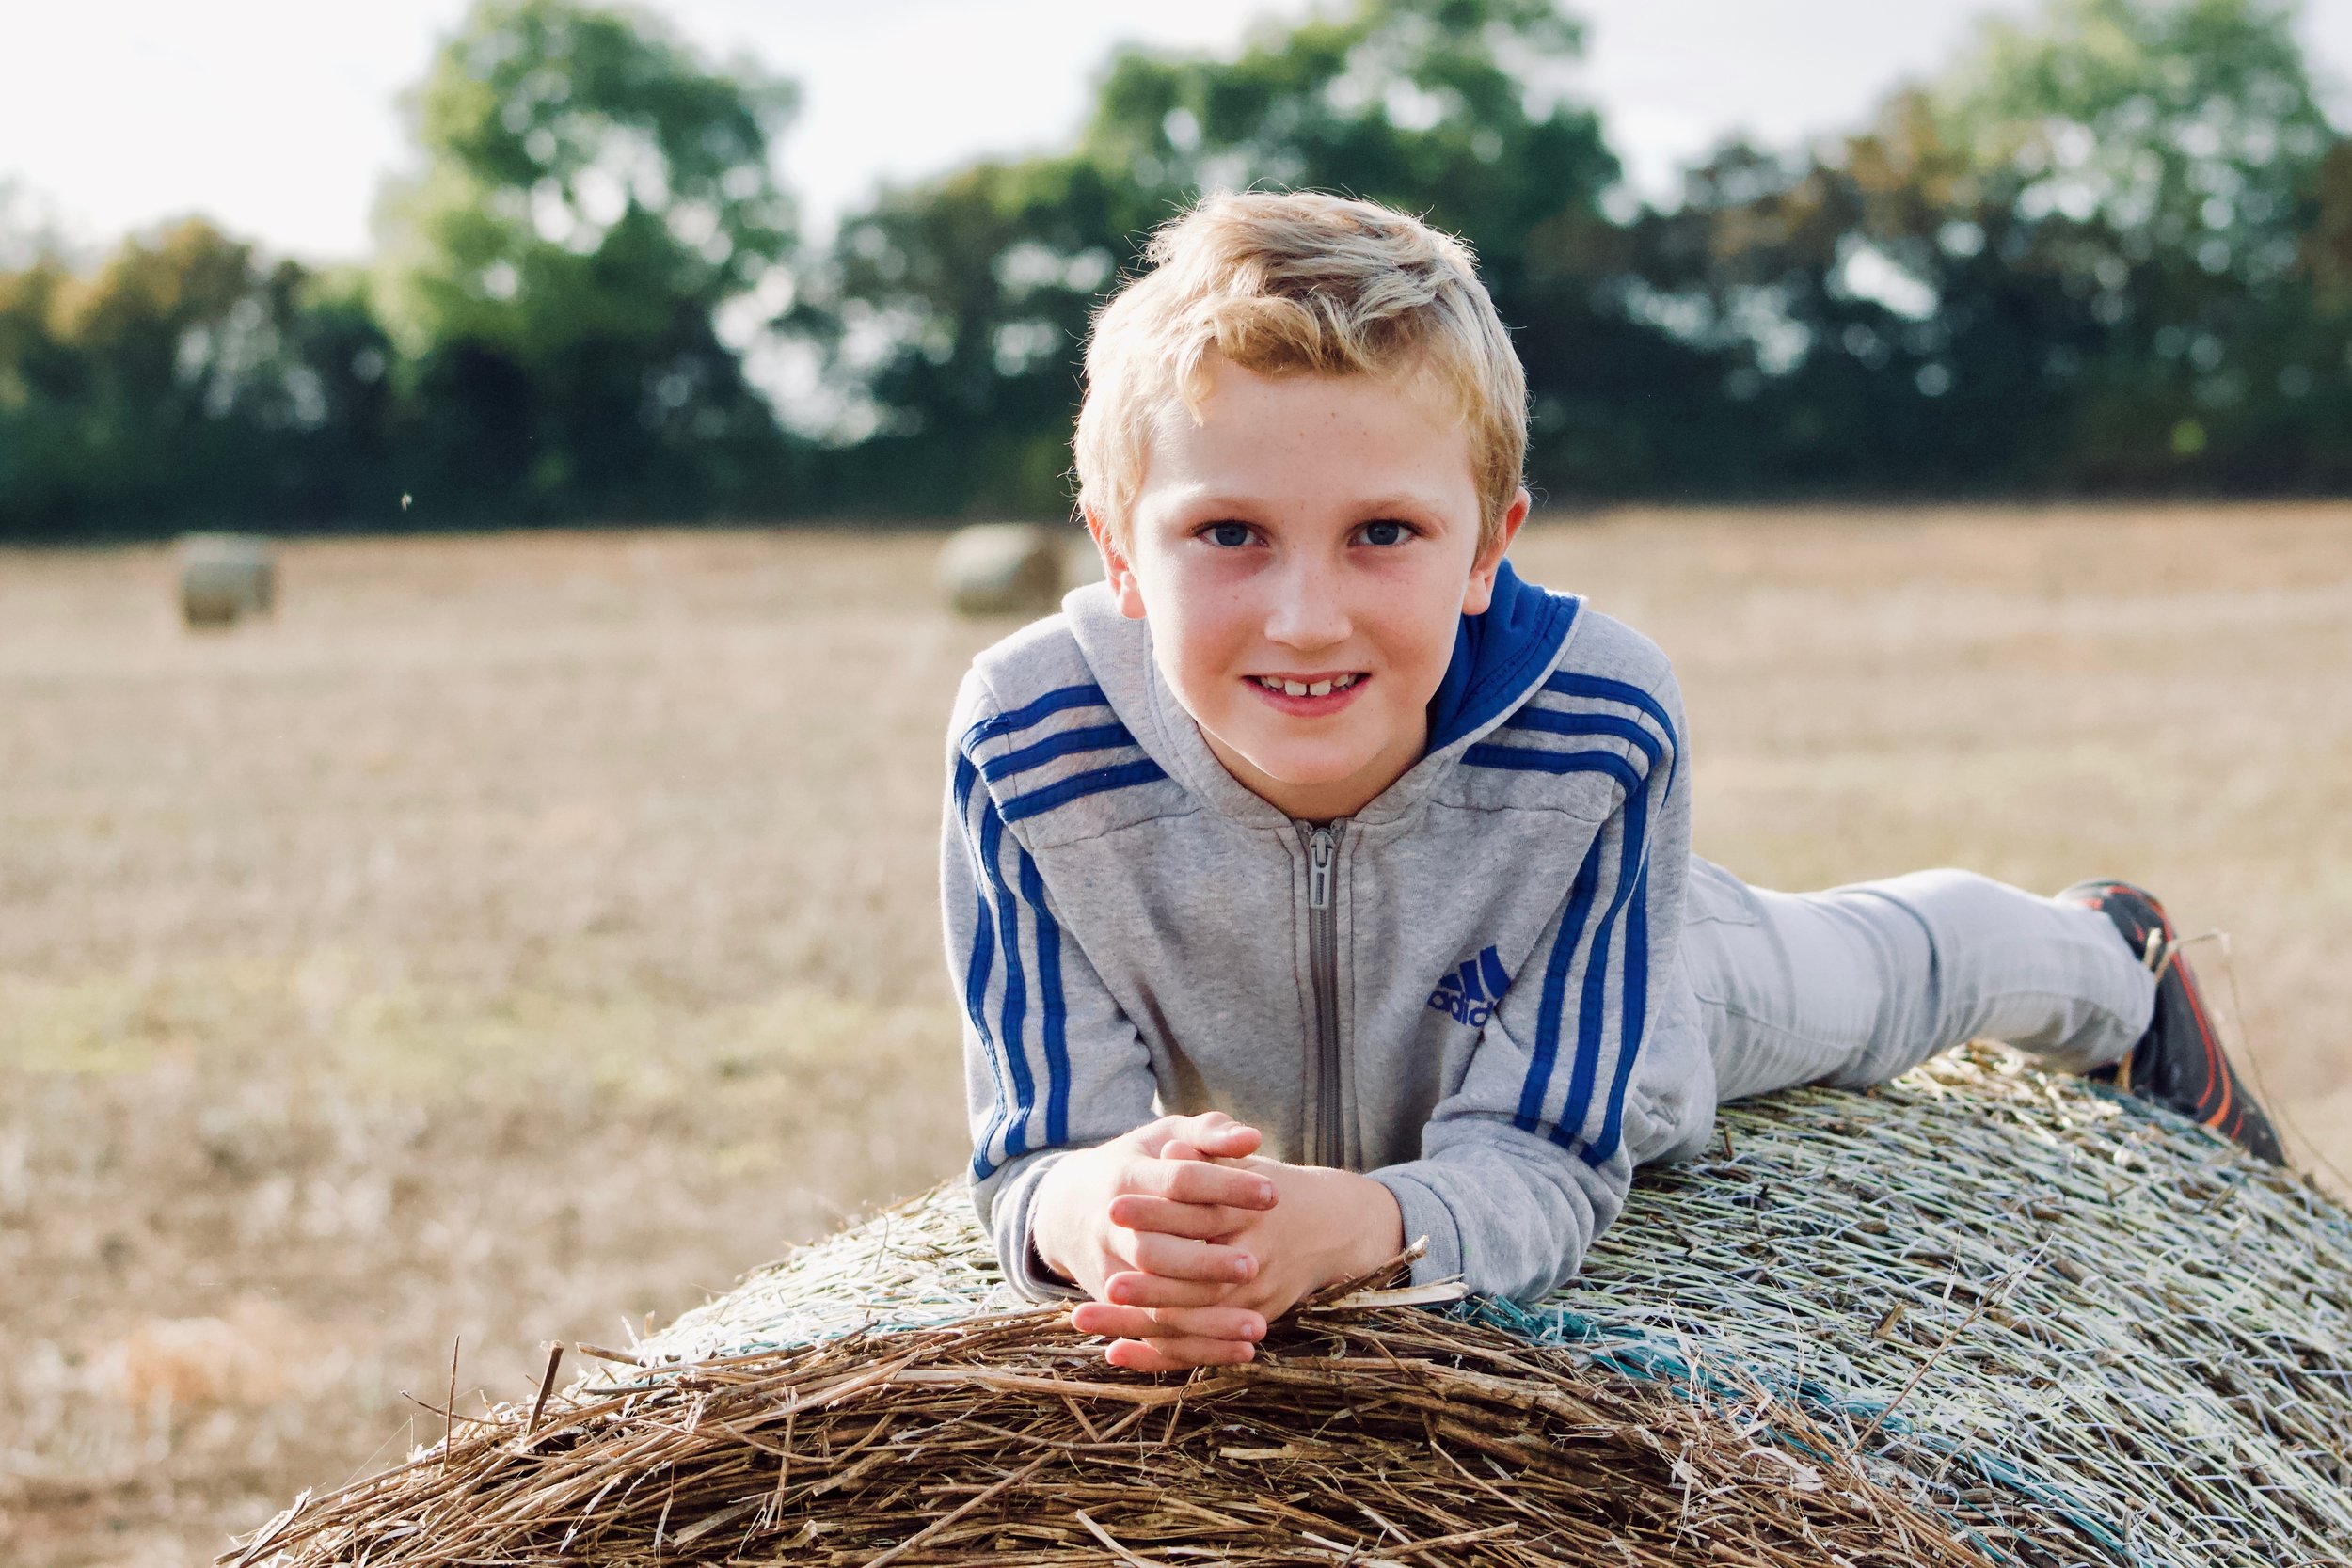 My eldest happily posing in a local crop field, South Gloucestershire.